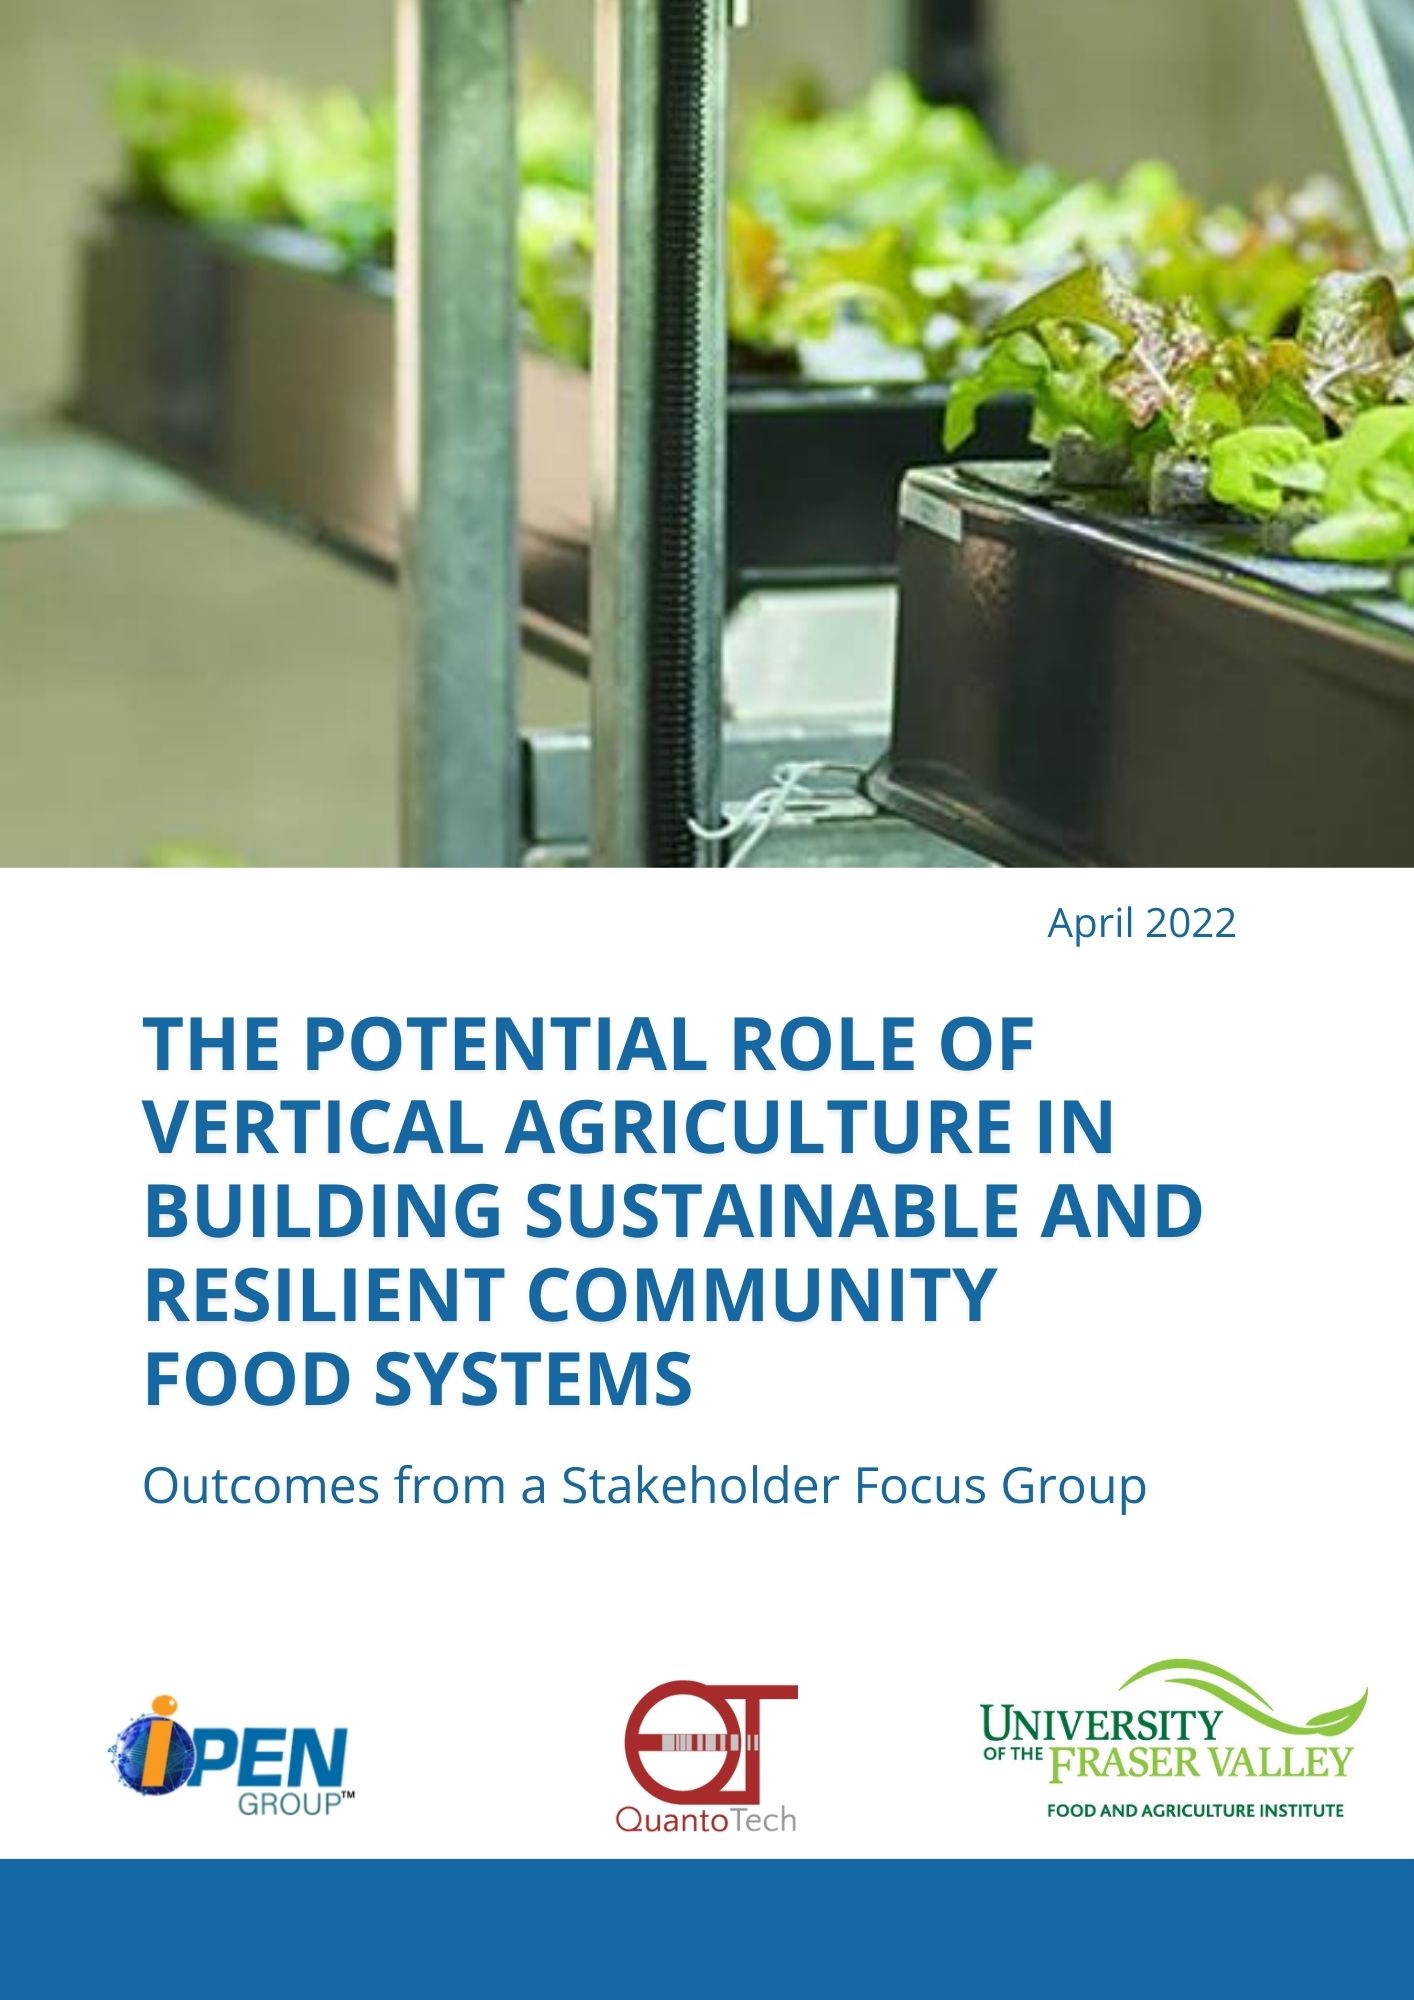 The potential role of vertical agriculture in building sustainable and resilient food systems: Outcomes from a stakeholder focus group report 